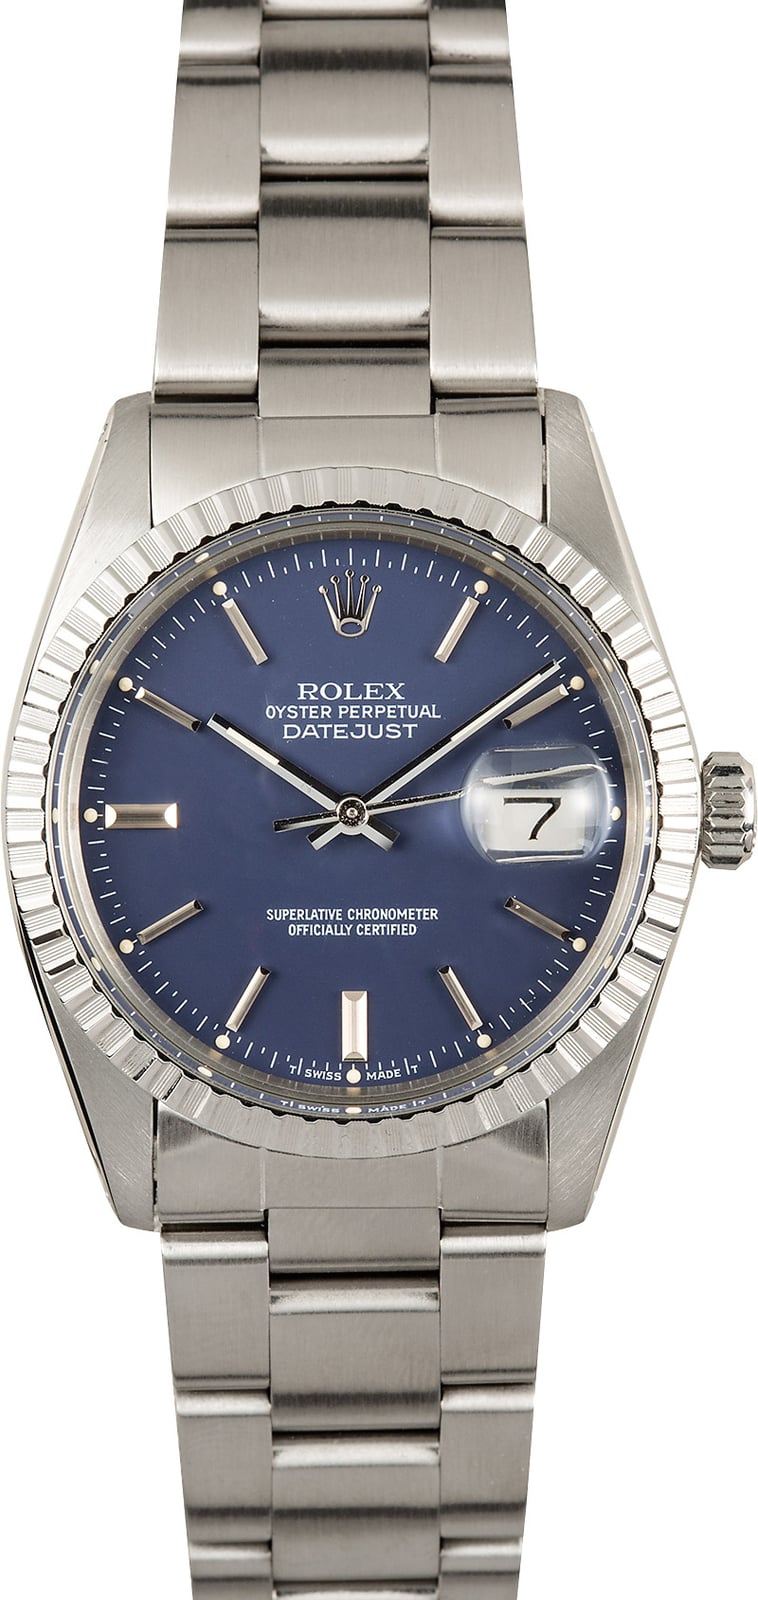 Buy Used Rolex 16030 | Bob's Watches 